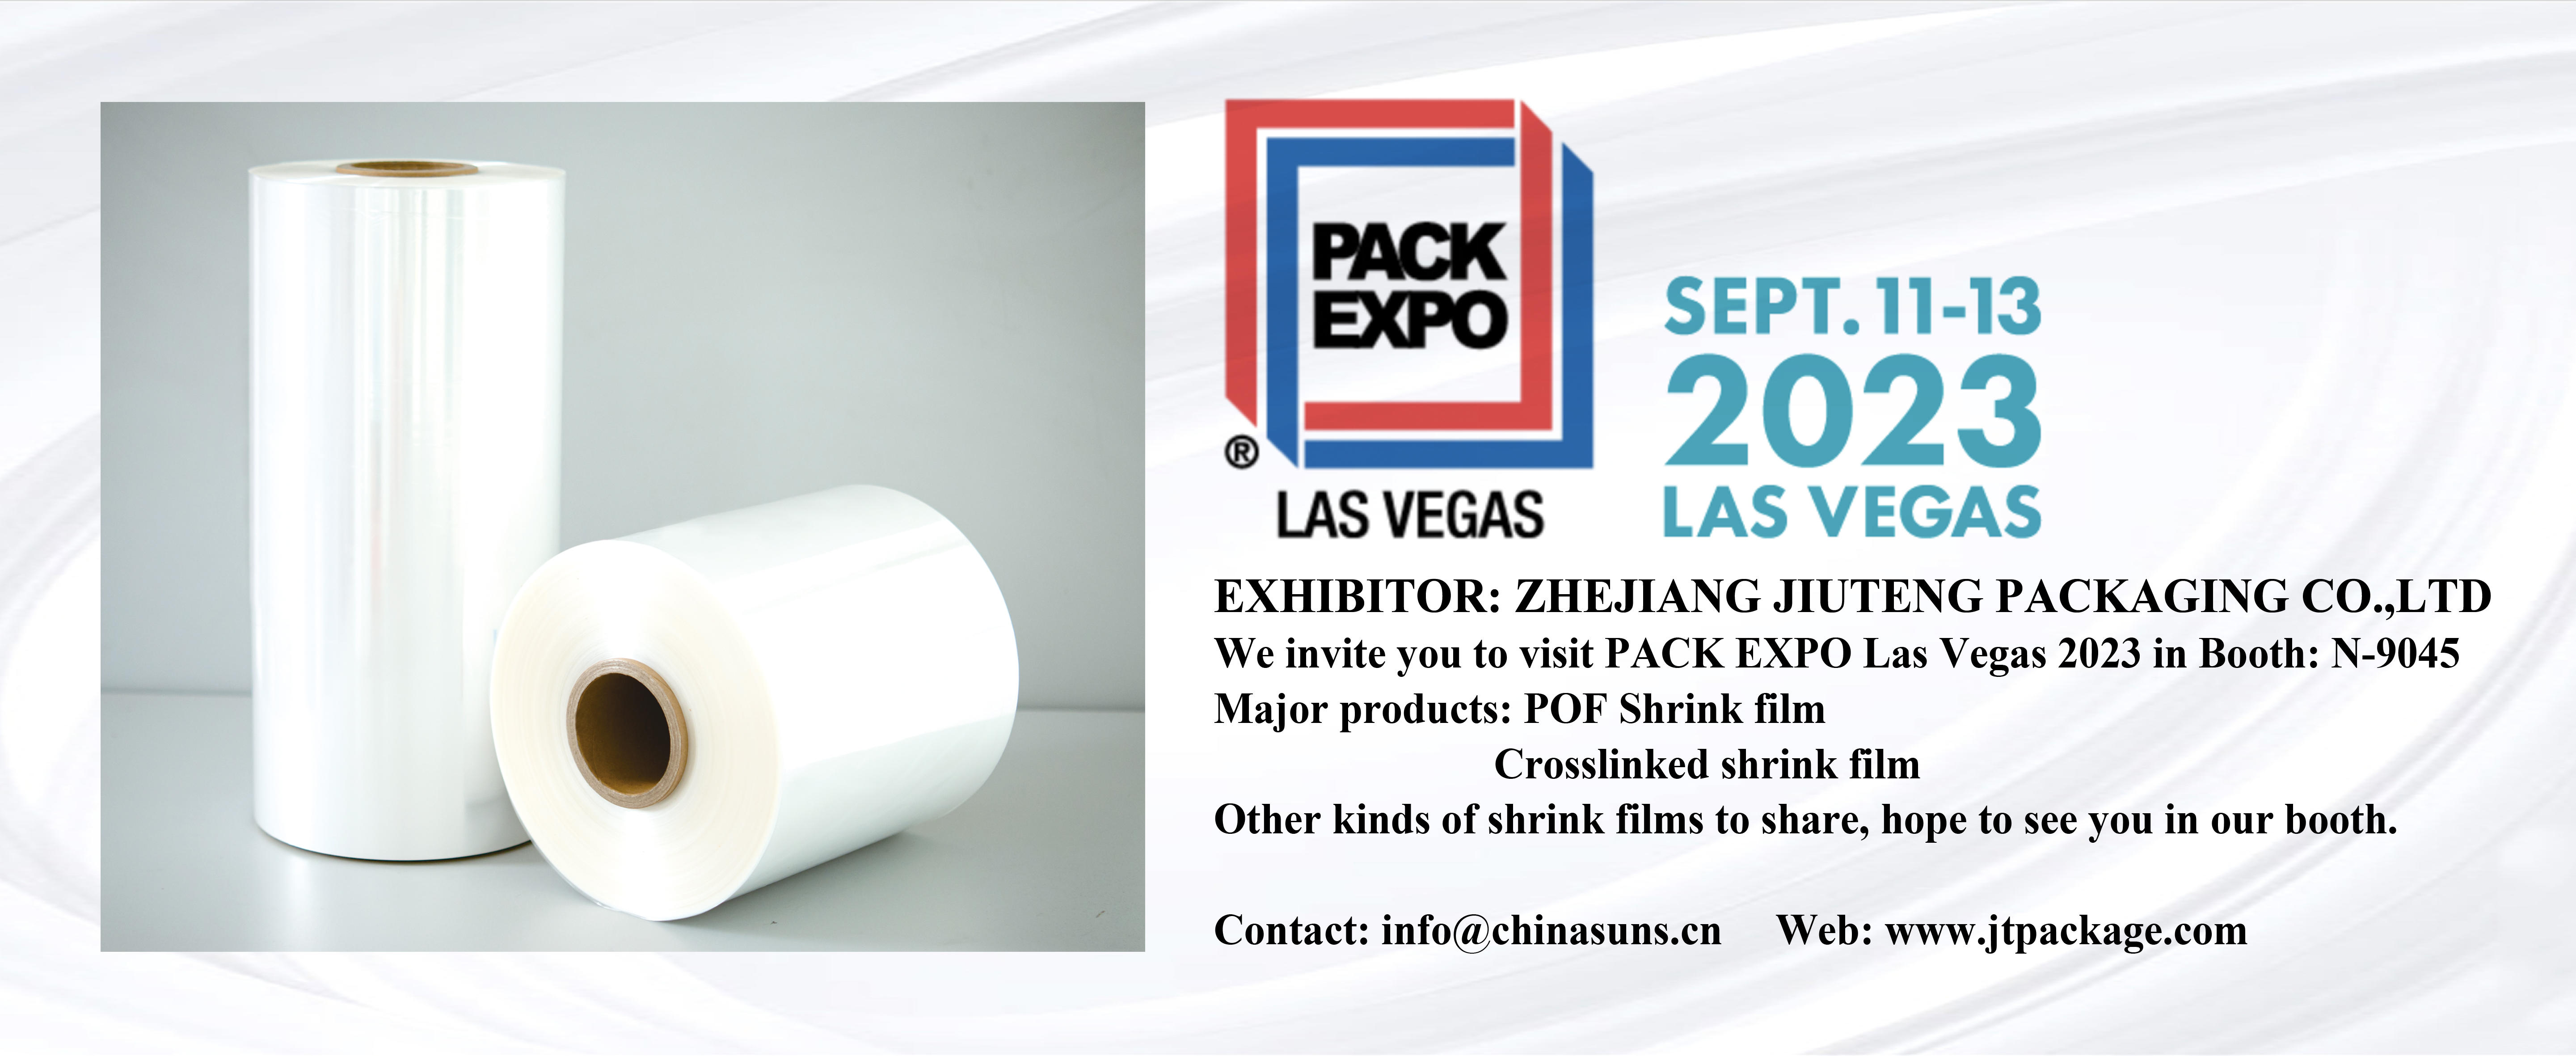 Visit PACK EXPO Las Vegas 2023 In Booth